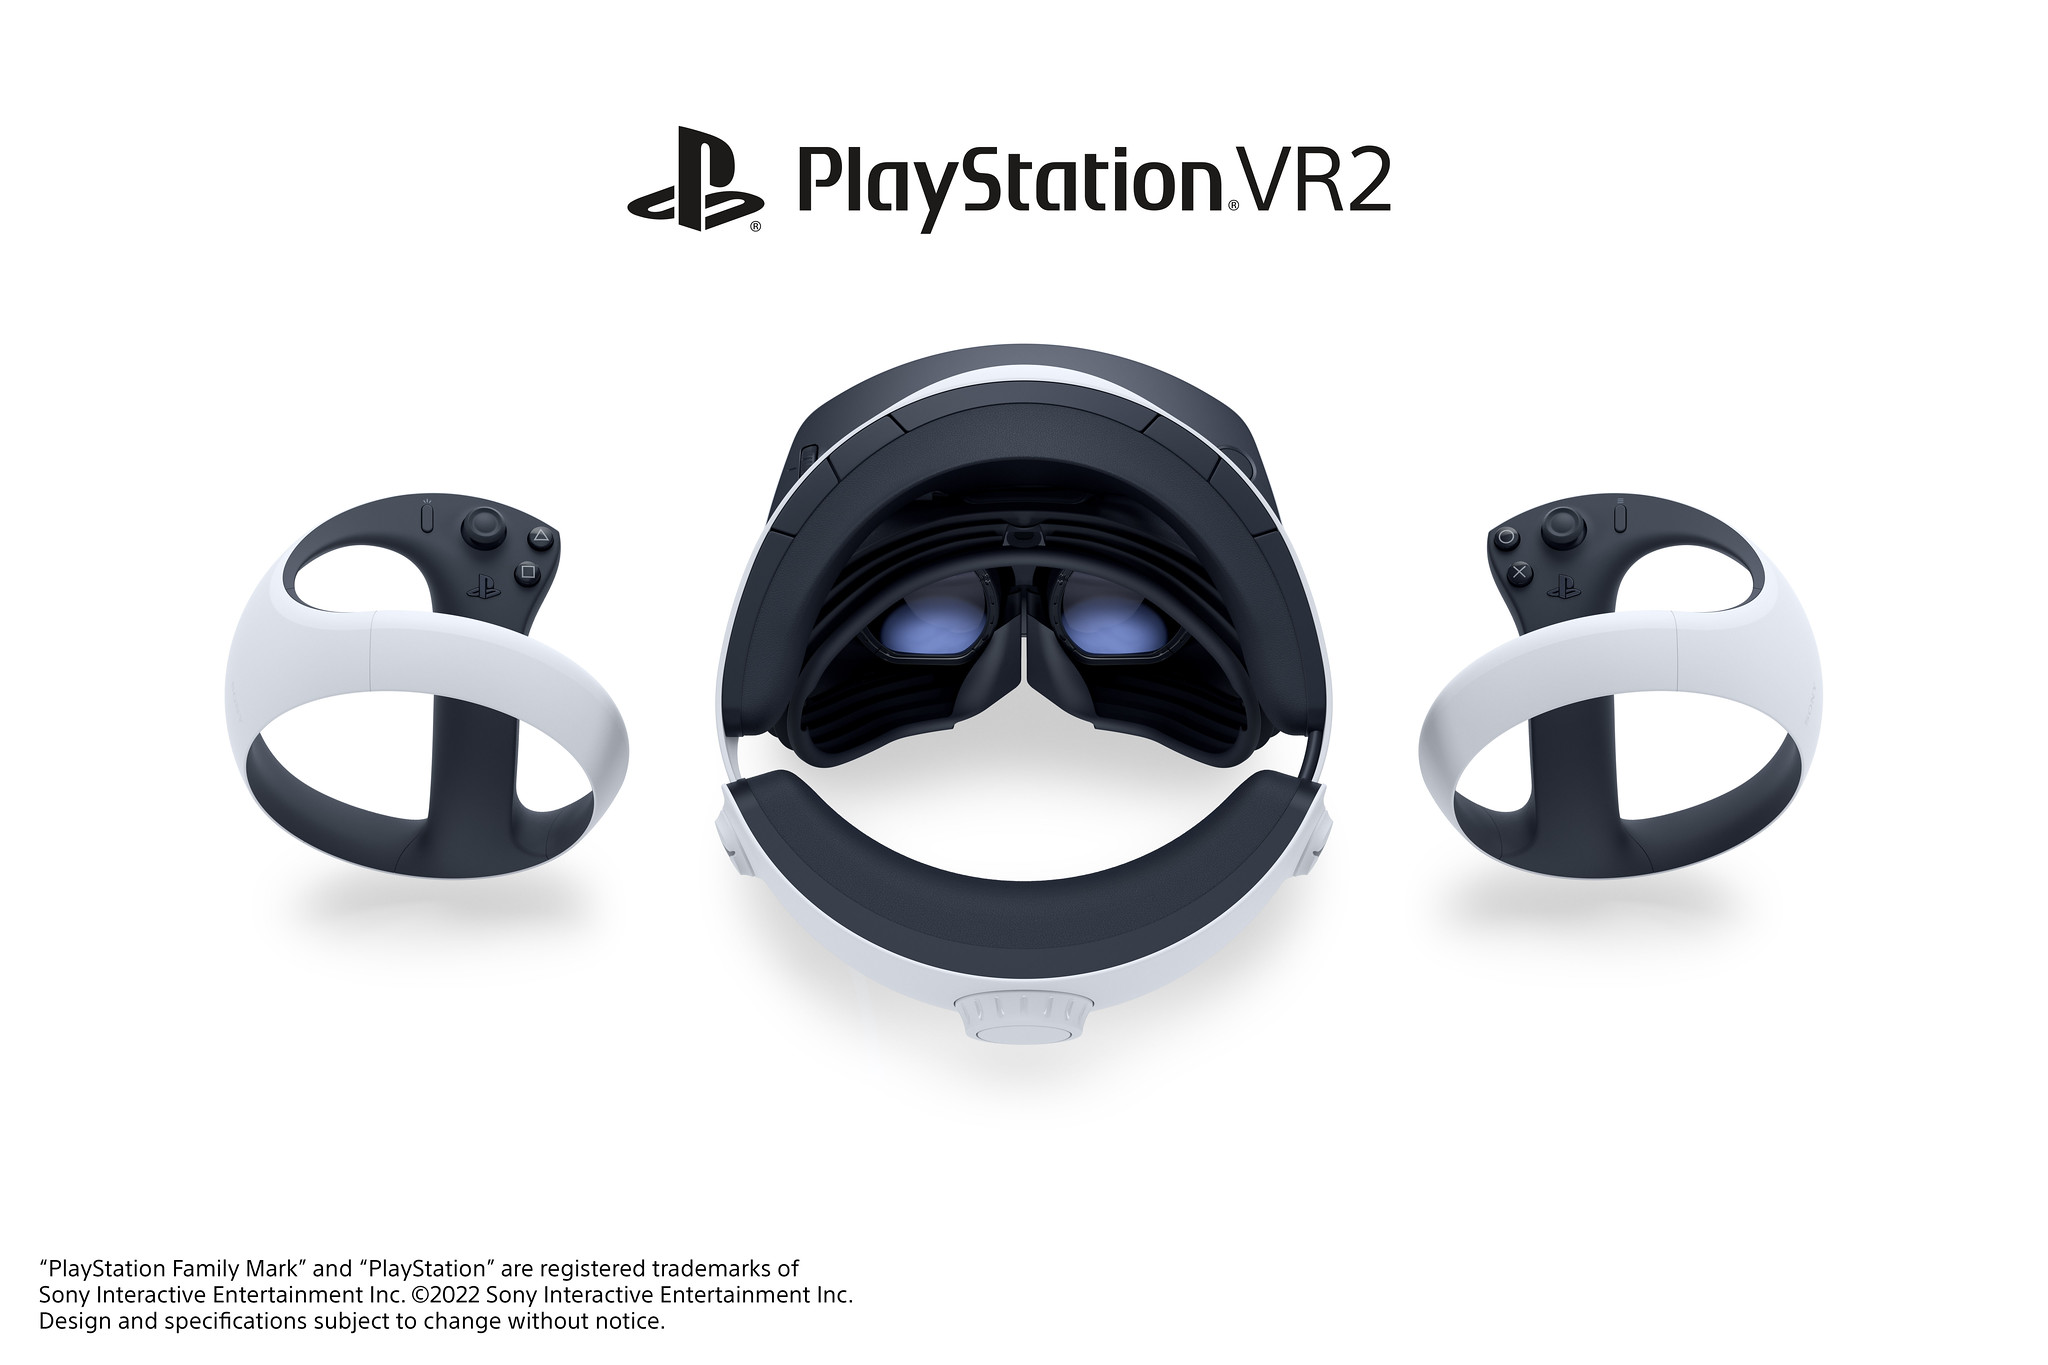 Sony's next-generation PS VR2 system launches in February 2023